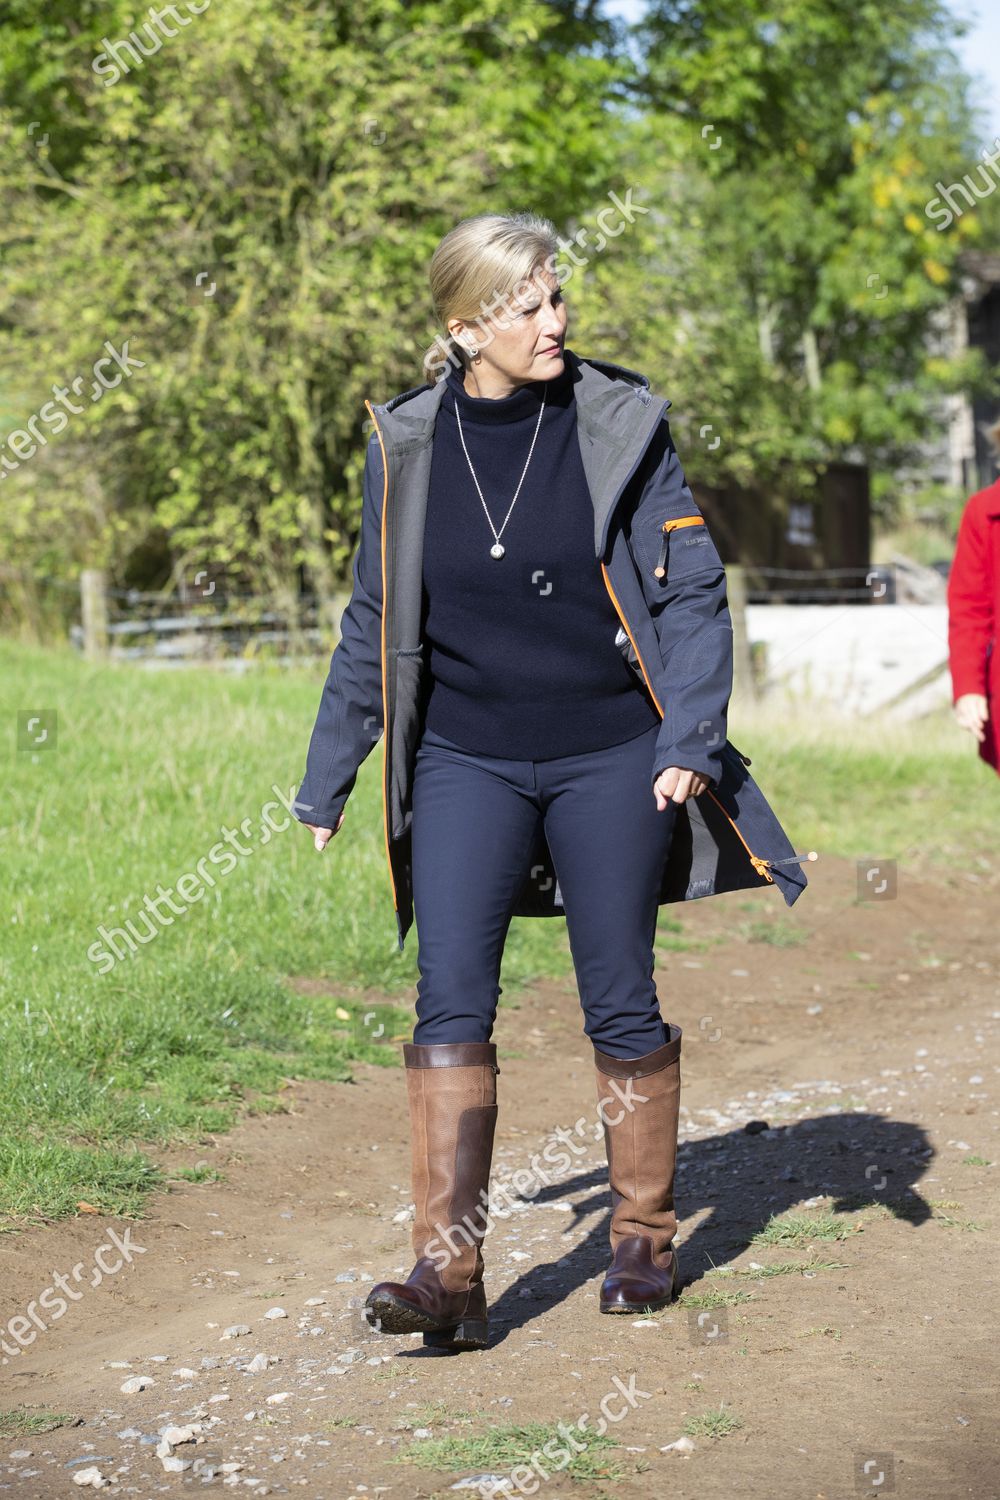 sophie-countess-of-wessex-visit-to-coverwood-farm-surrey-uk-shutterstock-editorial-10787745r.jpg